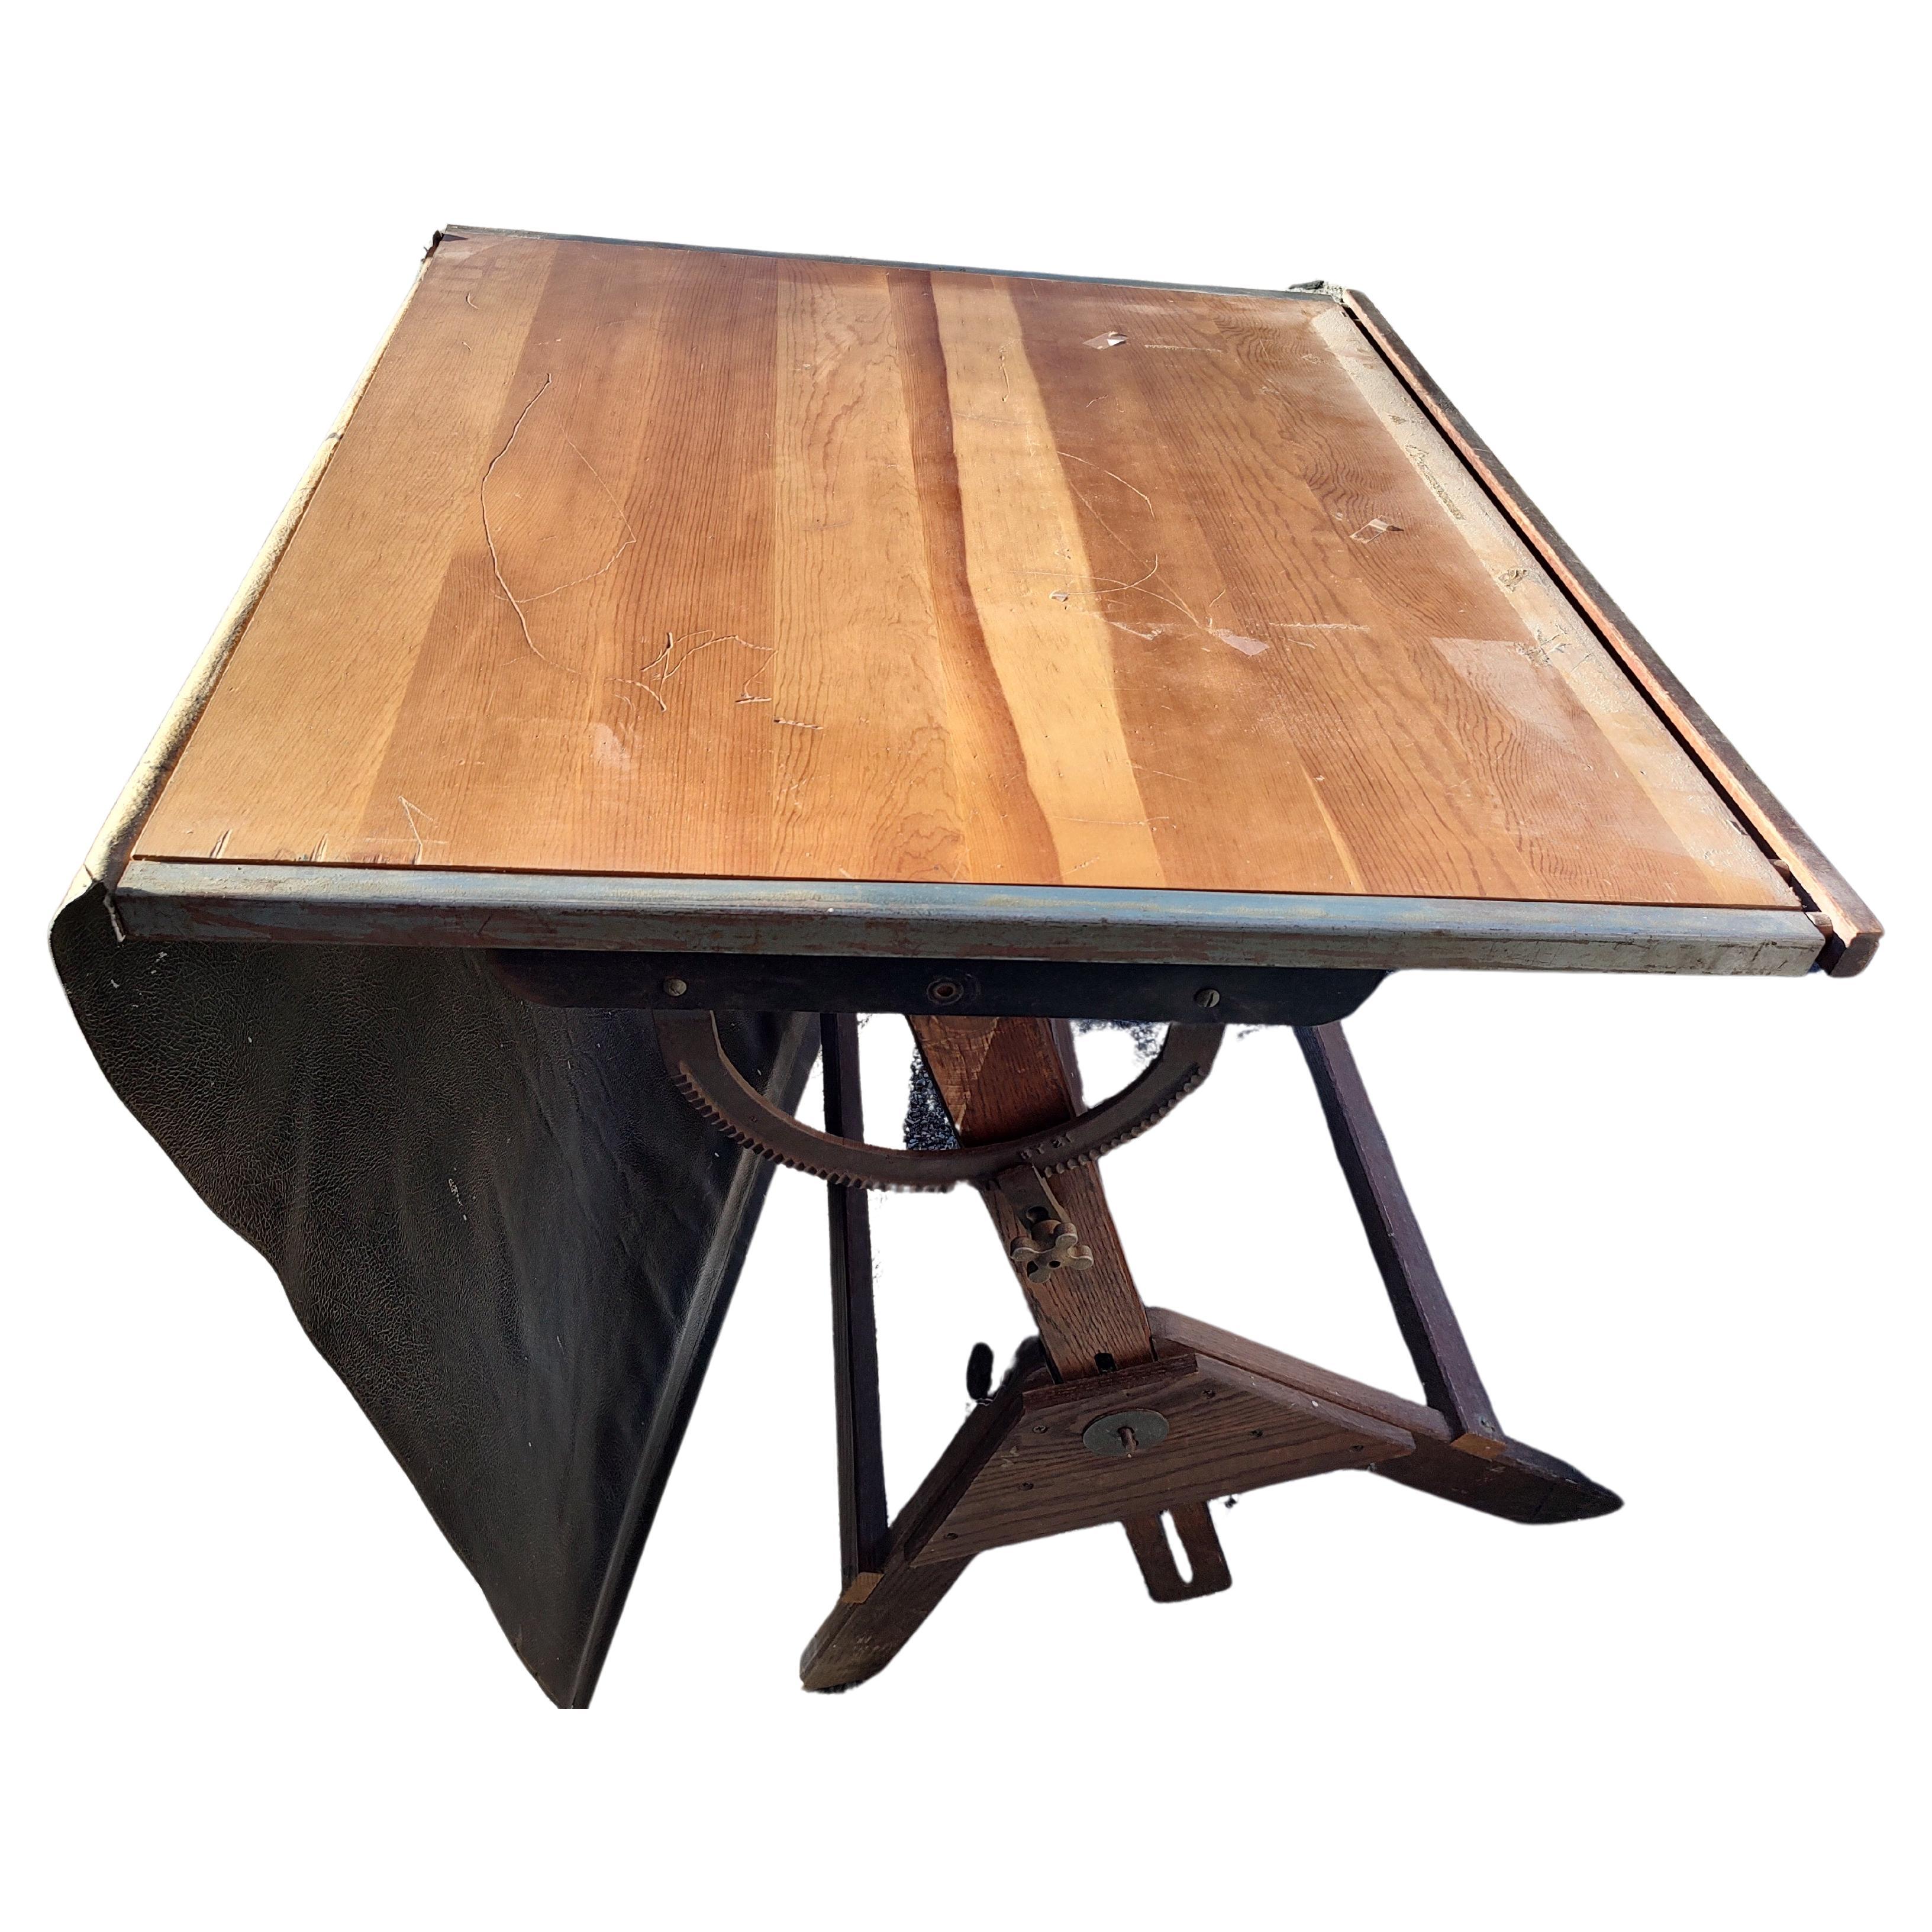 Great size and construction using oak for the base and maple for the top. Iron adjustment hardware all in very good condition with age related wear. No abuse. Height reaches 44inches and is fully adjustable to all angles. Has the original vinyl